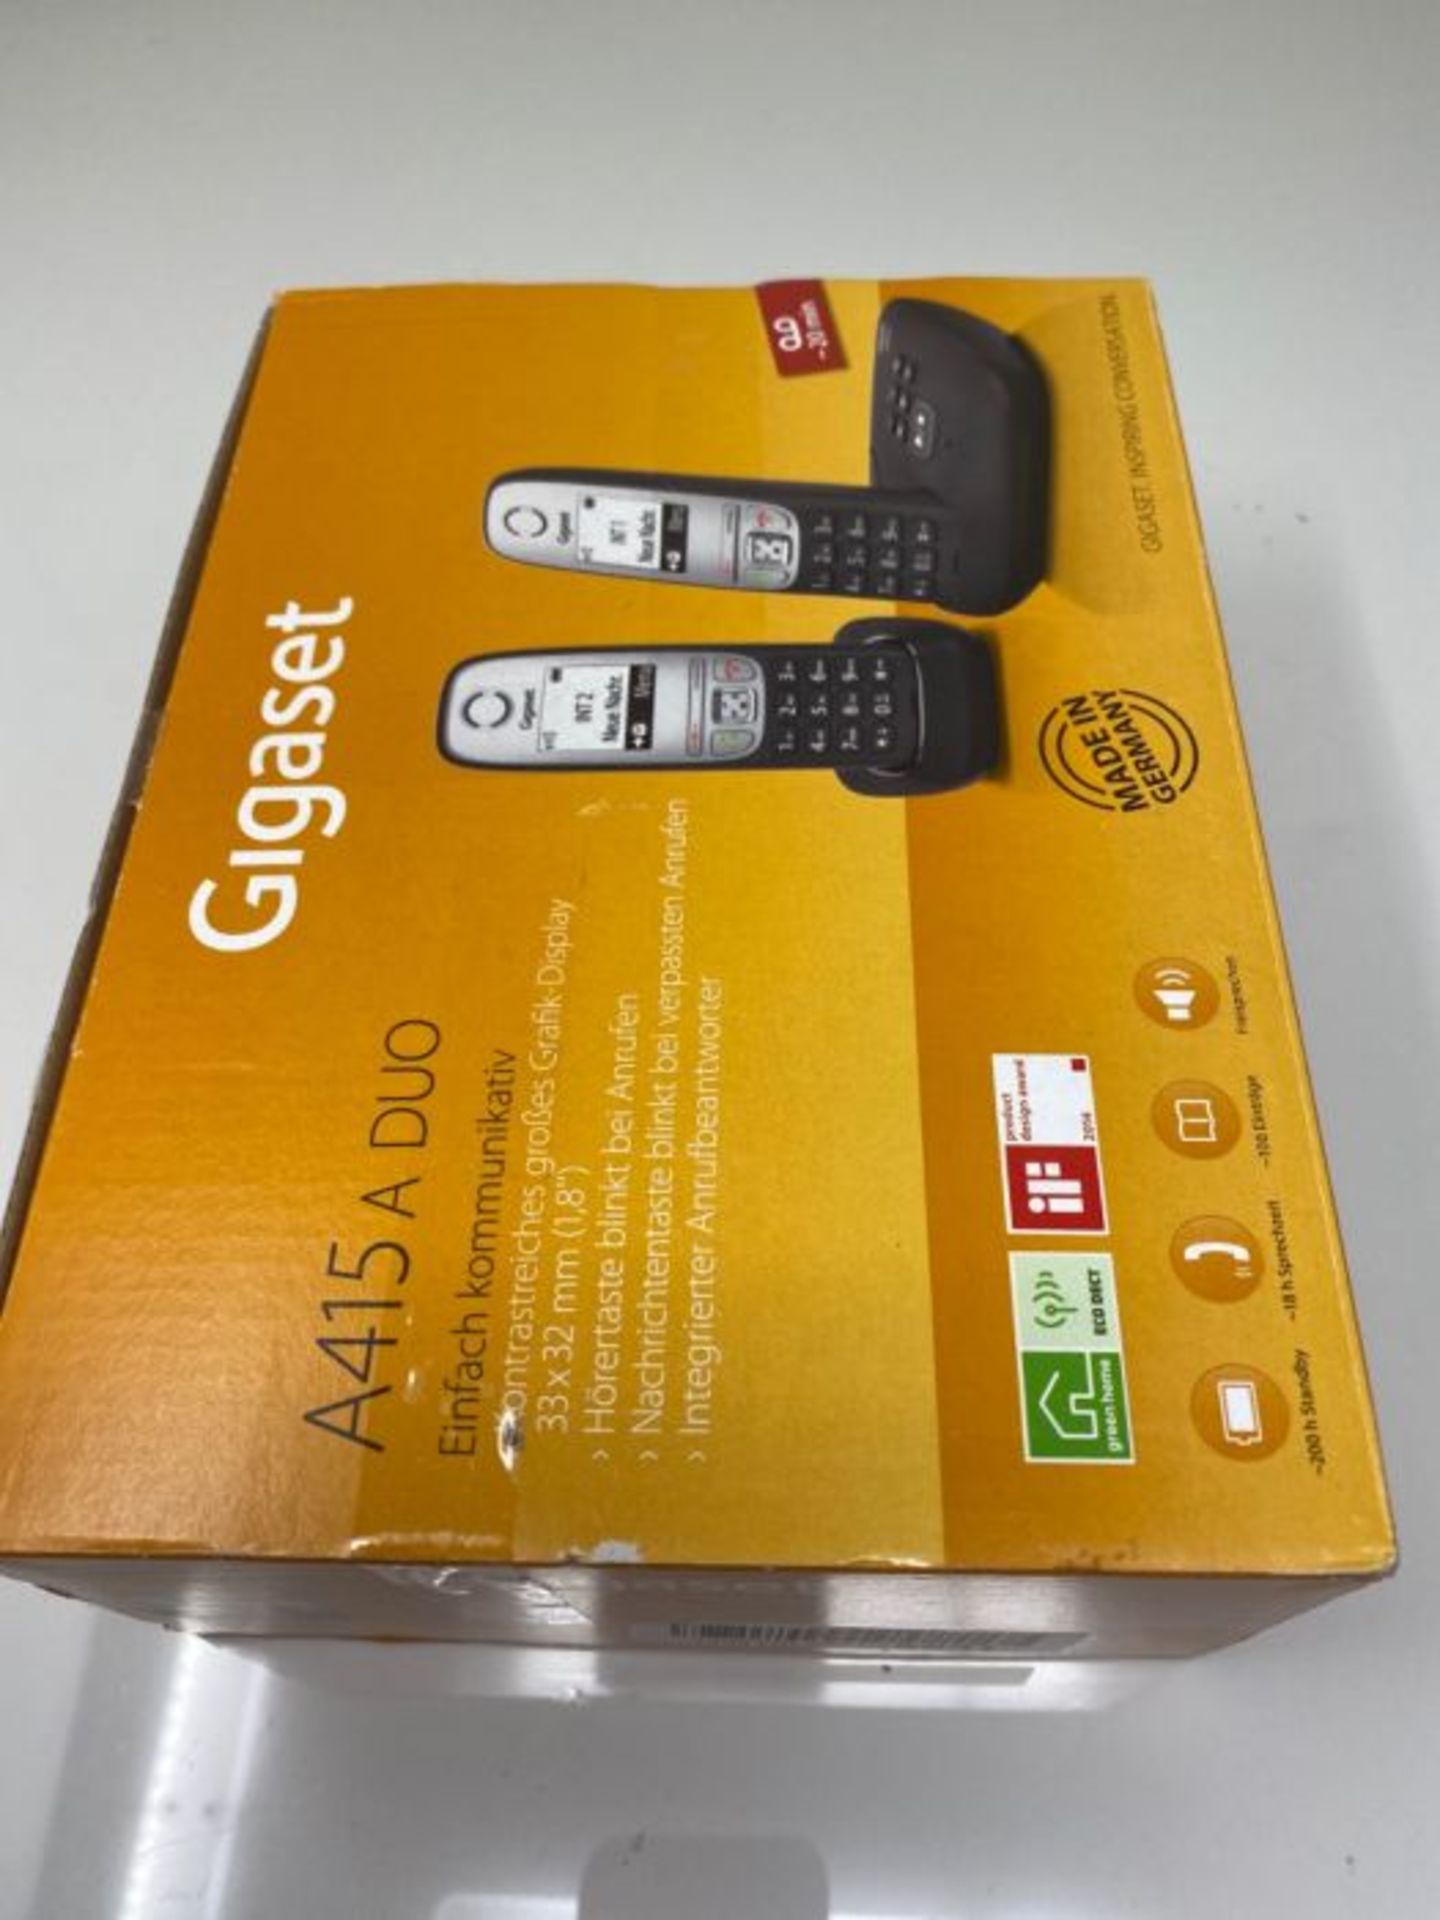 Gigaset A415A Duo Cordless Phone - Black